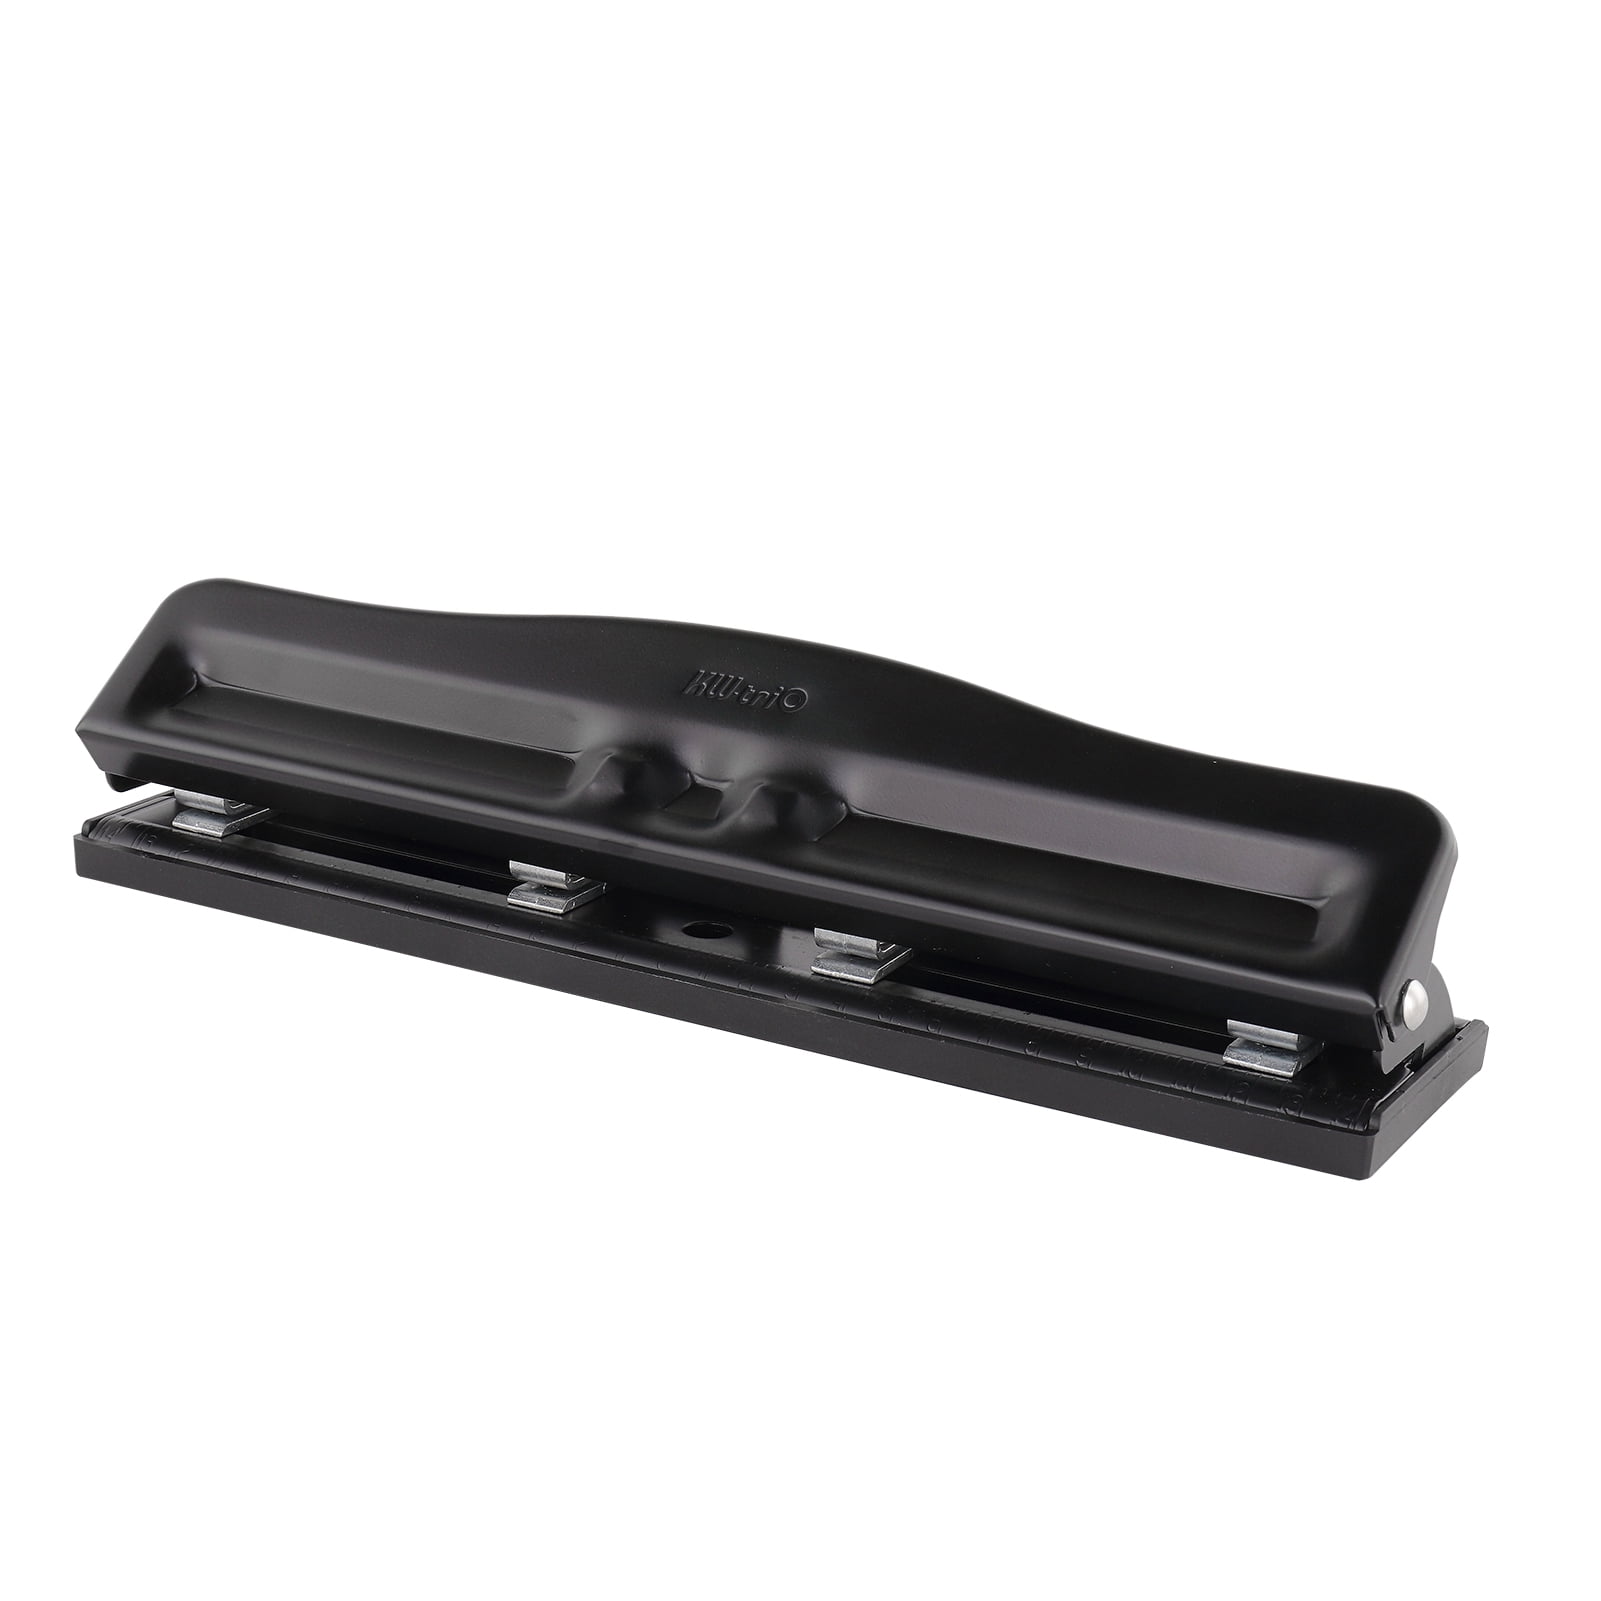 KW-triO Adjustable 6-Hole Desktop Punch Puncher for A4/A5/A6/A7